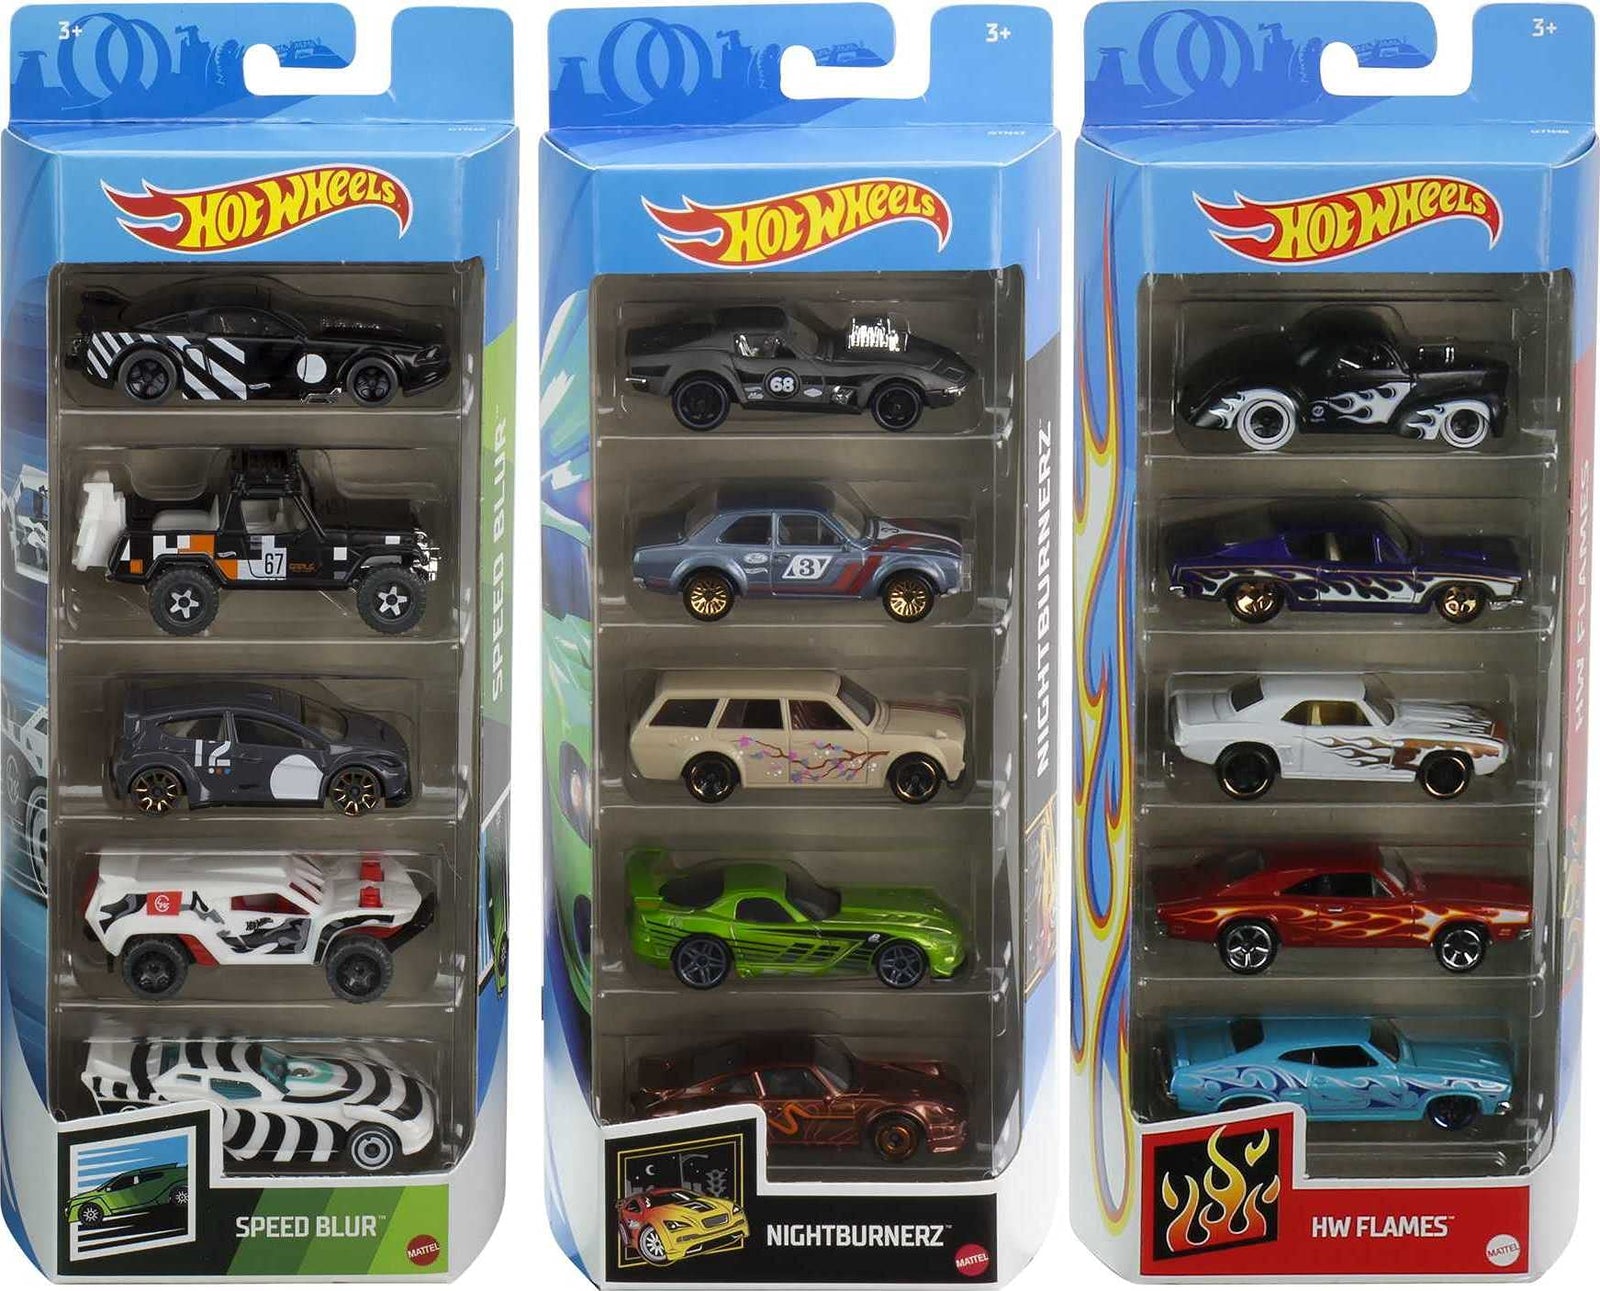 Hot Wheels Fast Pack 5-Pack Bundle with 15 Cars, 3 5-Packs of 1:64 Scale Racing Vehicles Themed Speed Blur, Nightburnerz & HW Flames, Gift for Collectors & Kids 3 Years Old & Up [Amazon Exclusive]